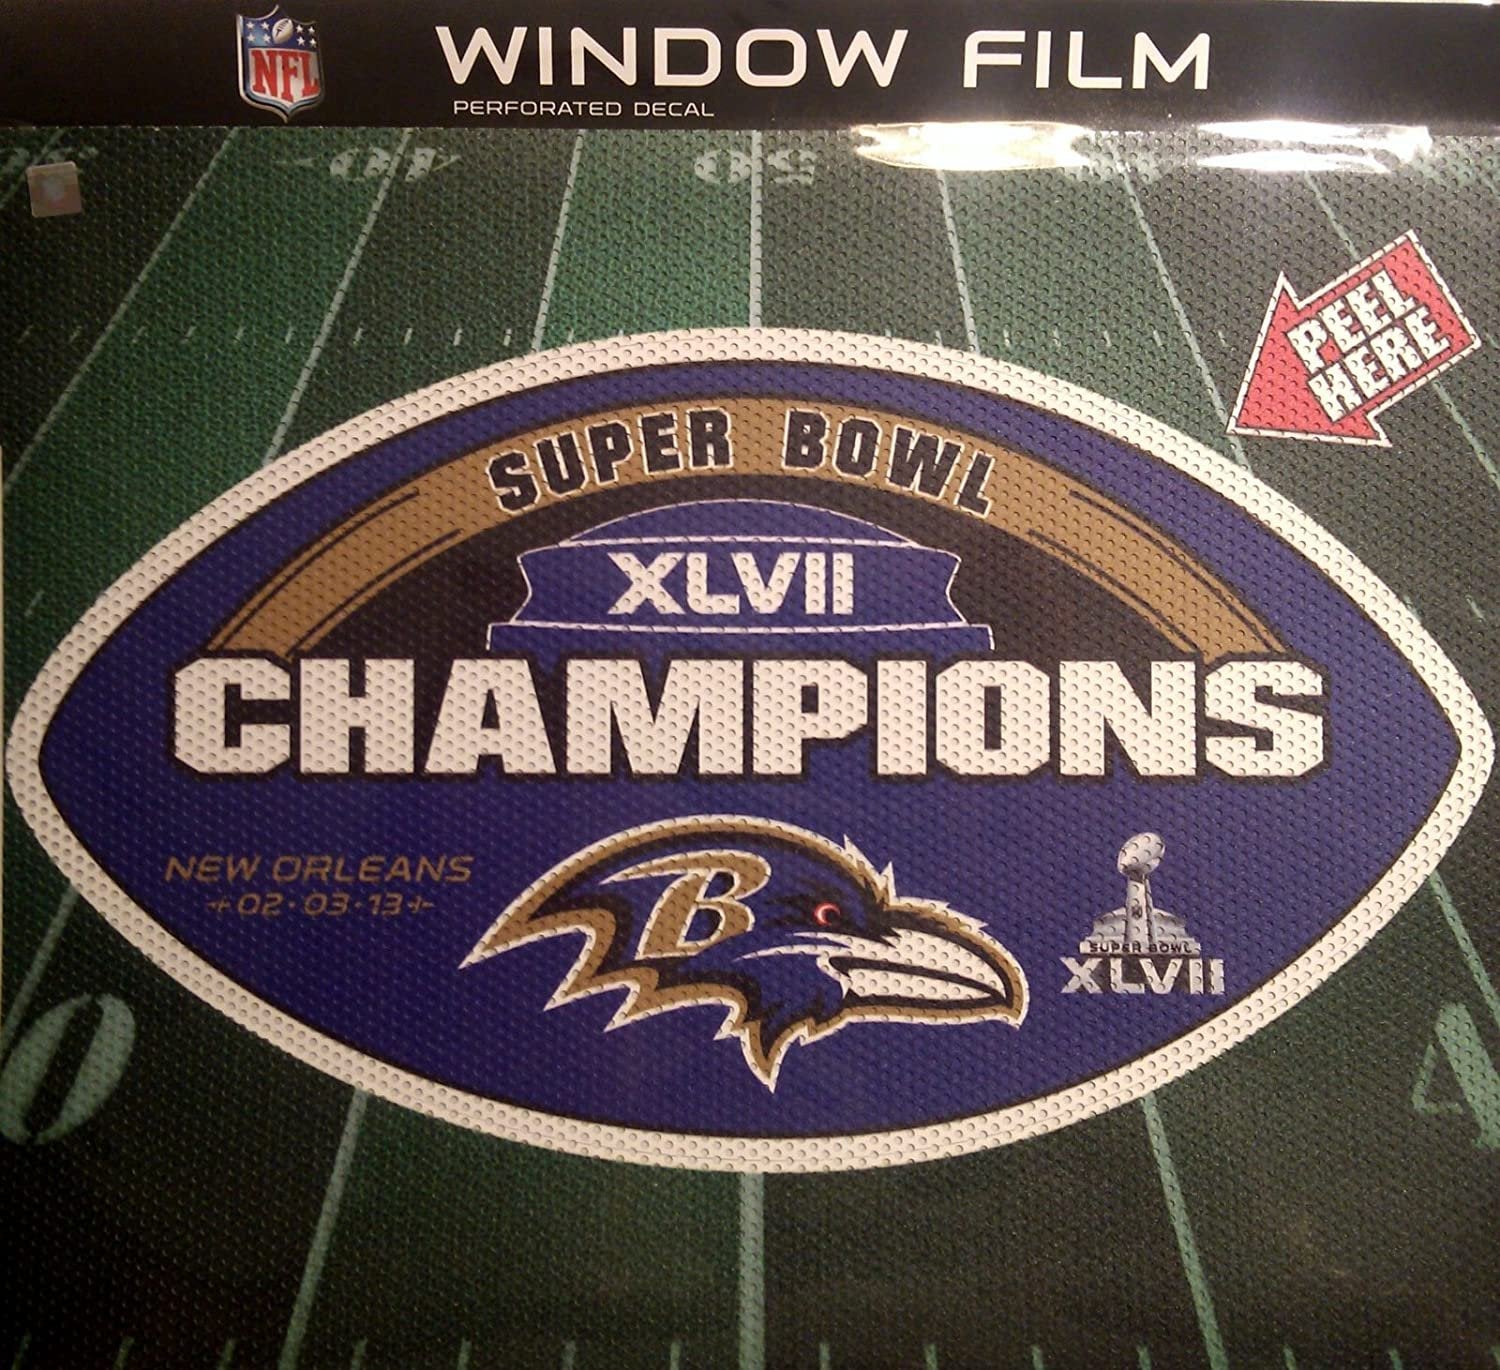 Baltimore Ravens Super Bowl XLVII Champions 12 Inch Preforated Window Film Decal Sticker, One-Way Vision, Adhesive Backing